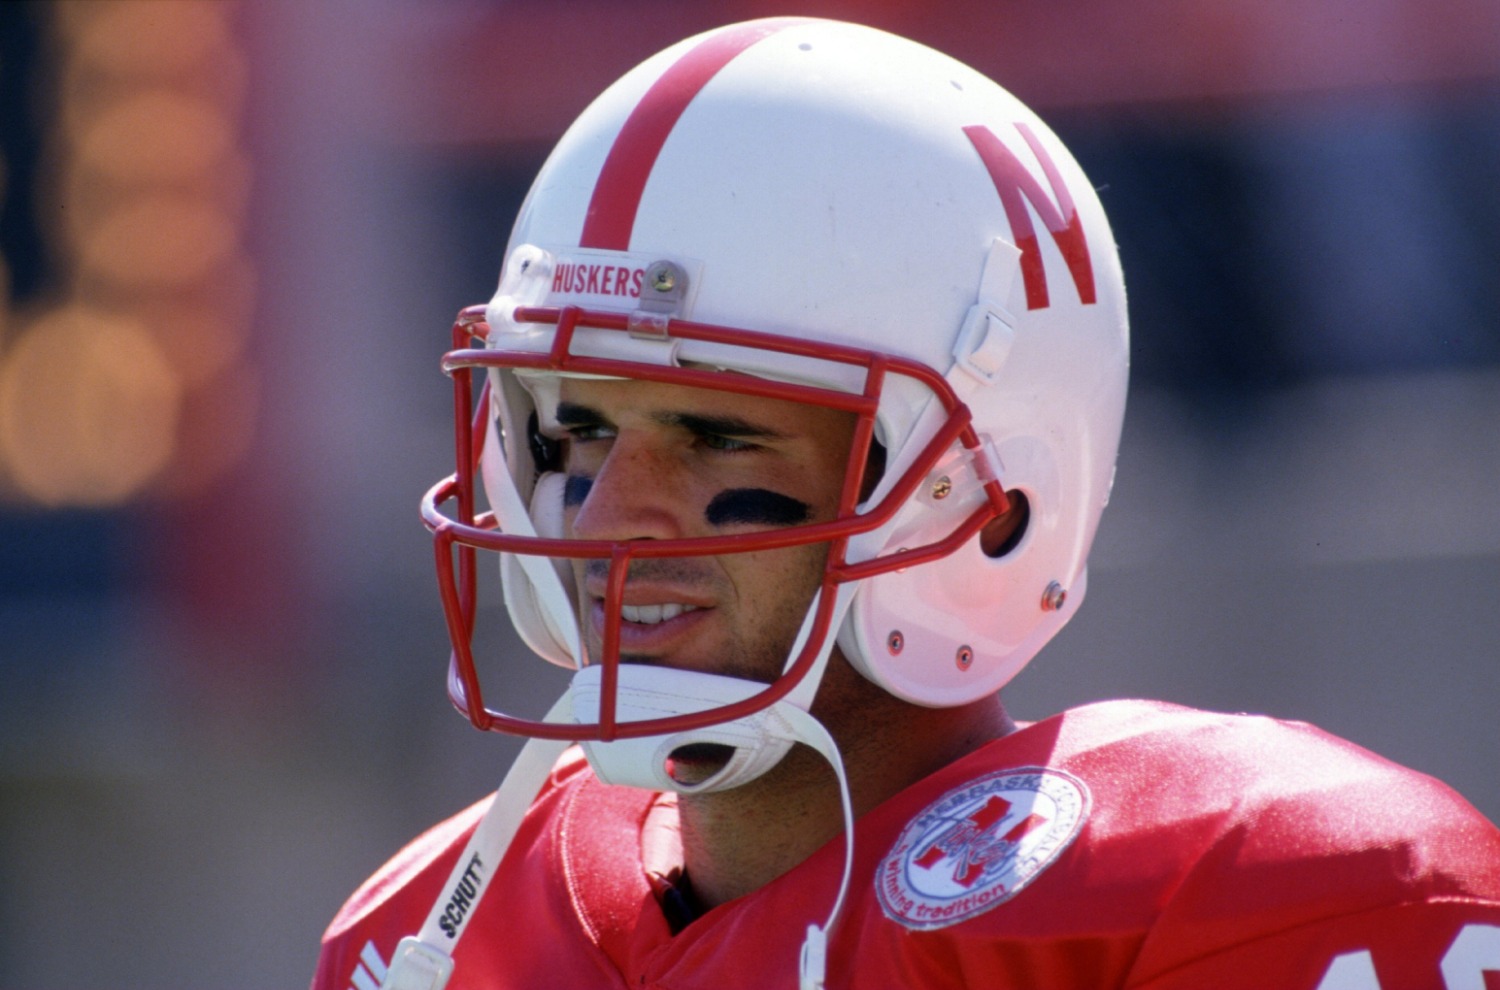 Nebraska quarterback Brook Berringer tragically died just two days before the biggest moment of his life.